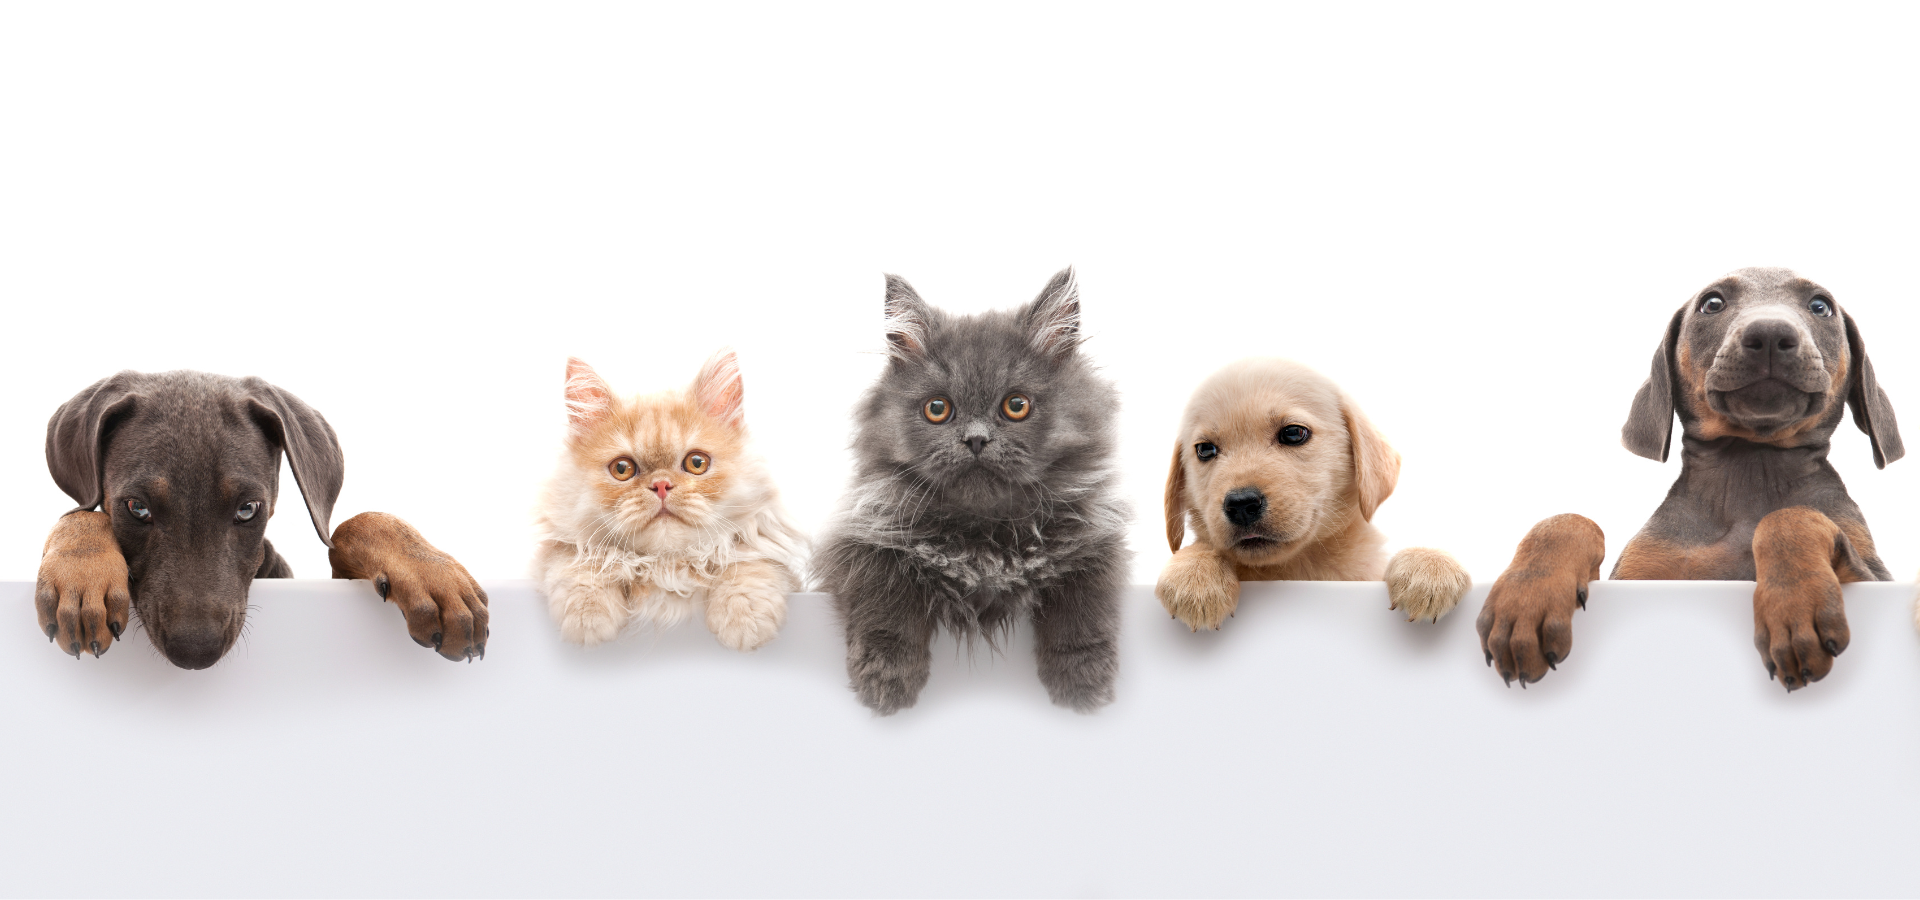 All Natural and Safe Pet care for dogs and cats, treats, nontoxic cleaning products, accessories